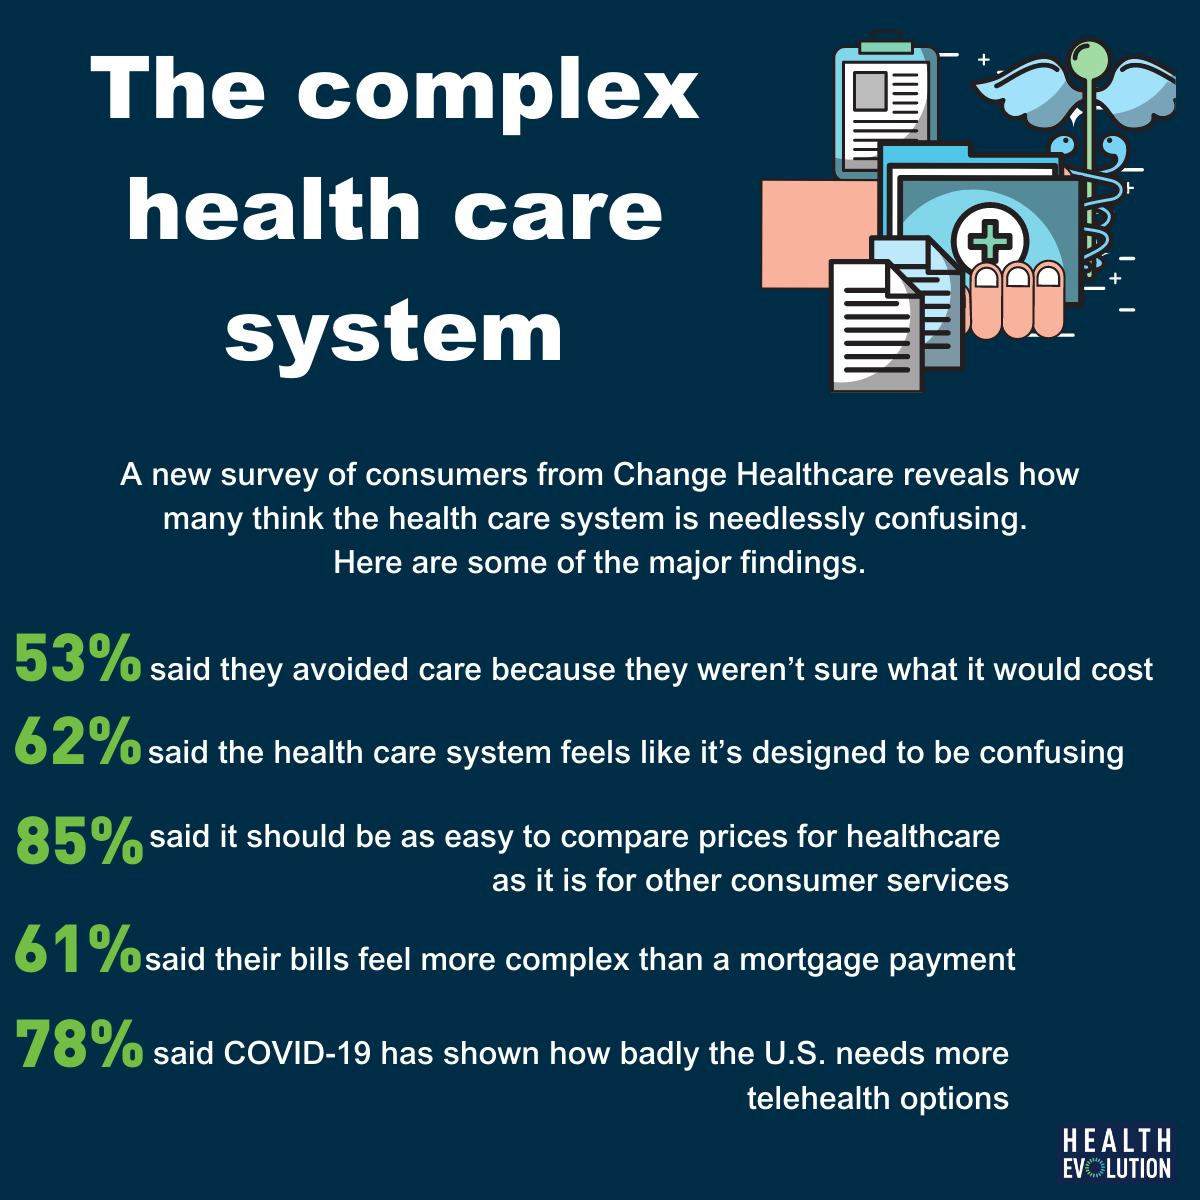 The change healthcare system changes in the healthcare industry in the past 10 years